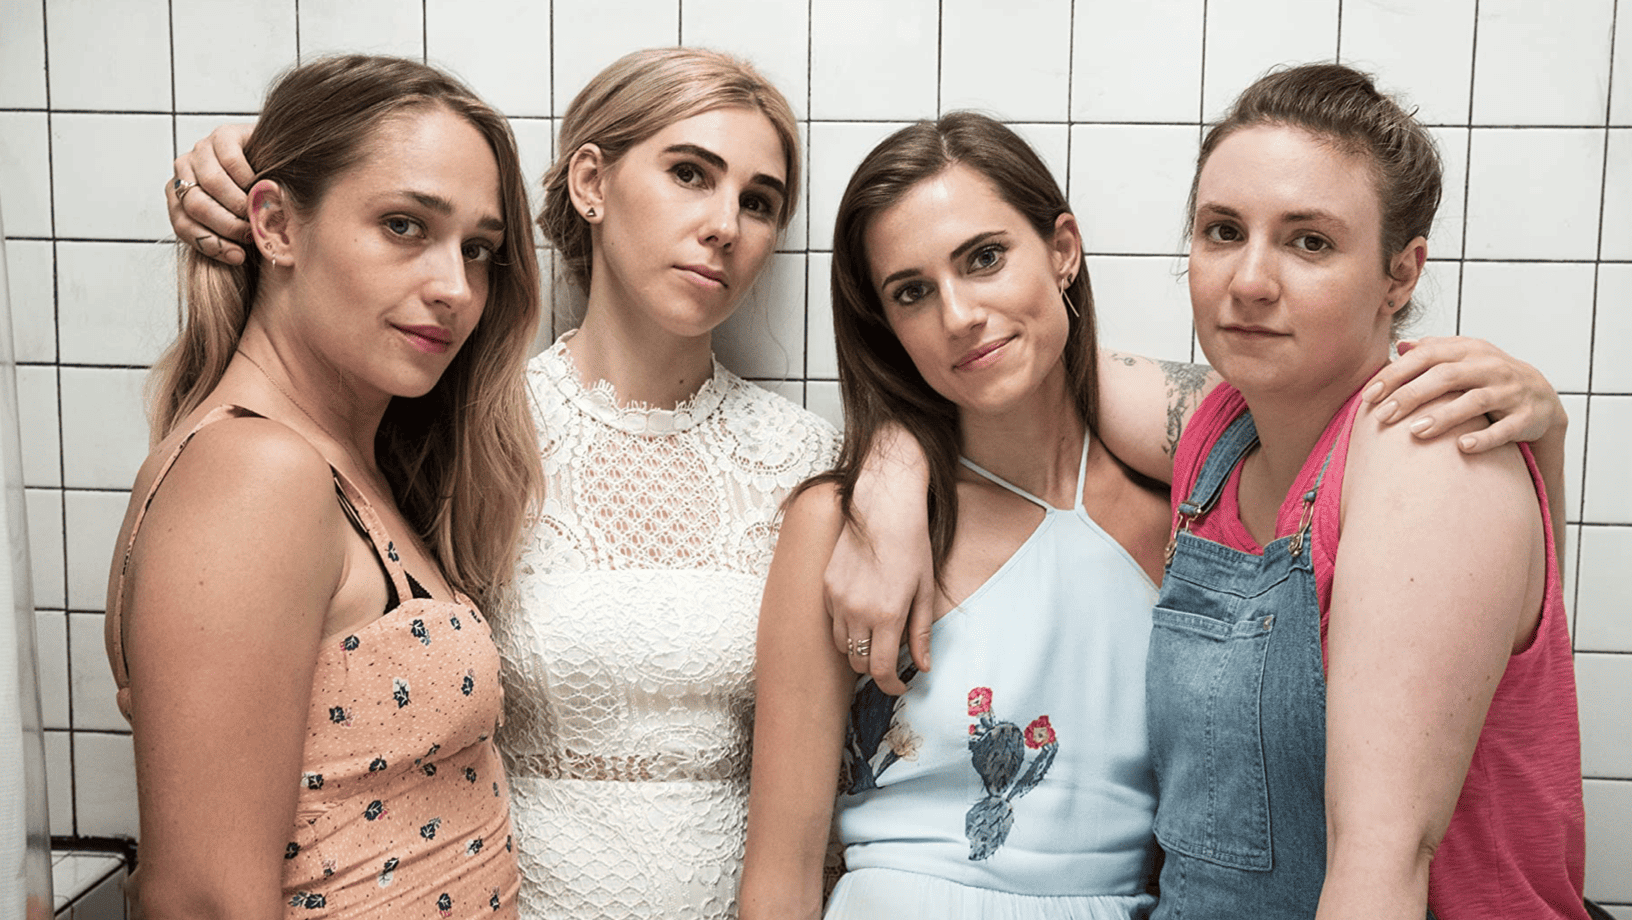 Why ‘Girls’ Is Having a Renaissance